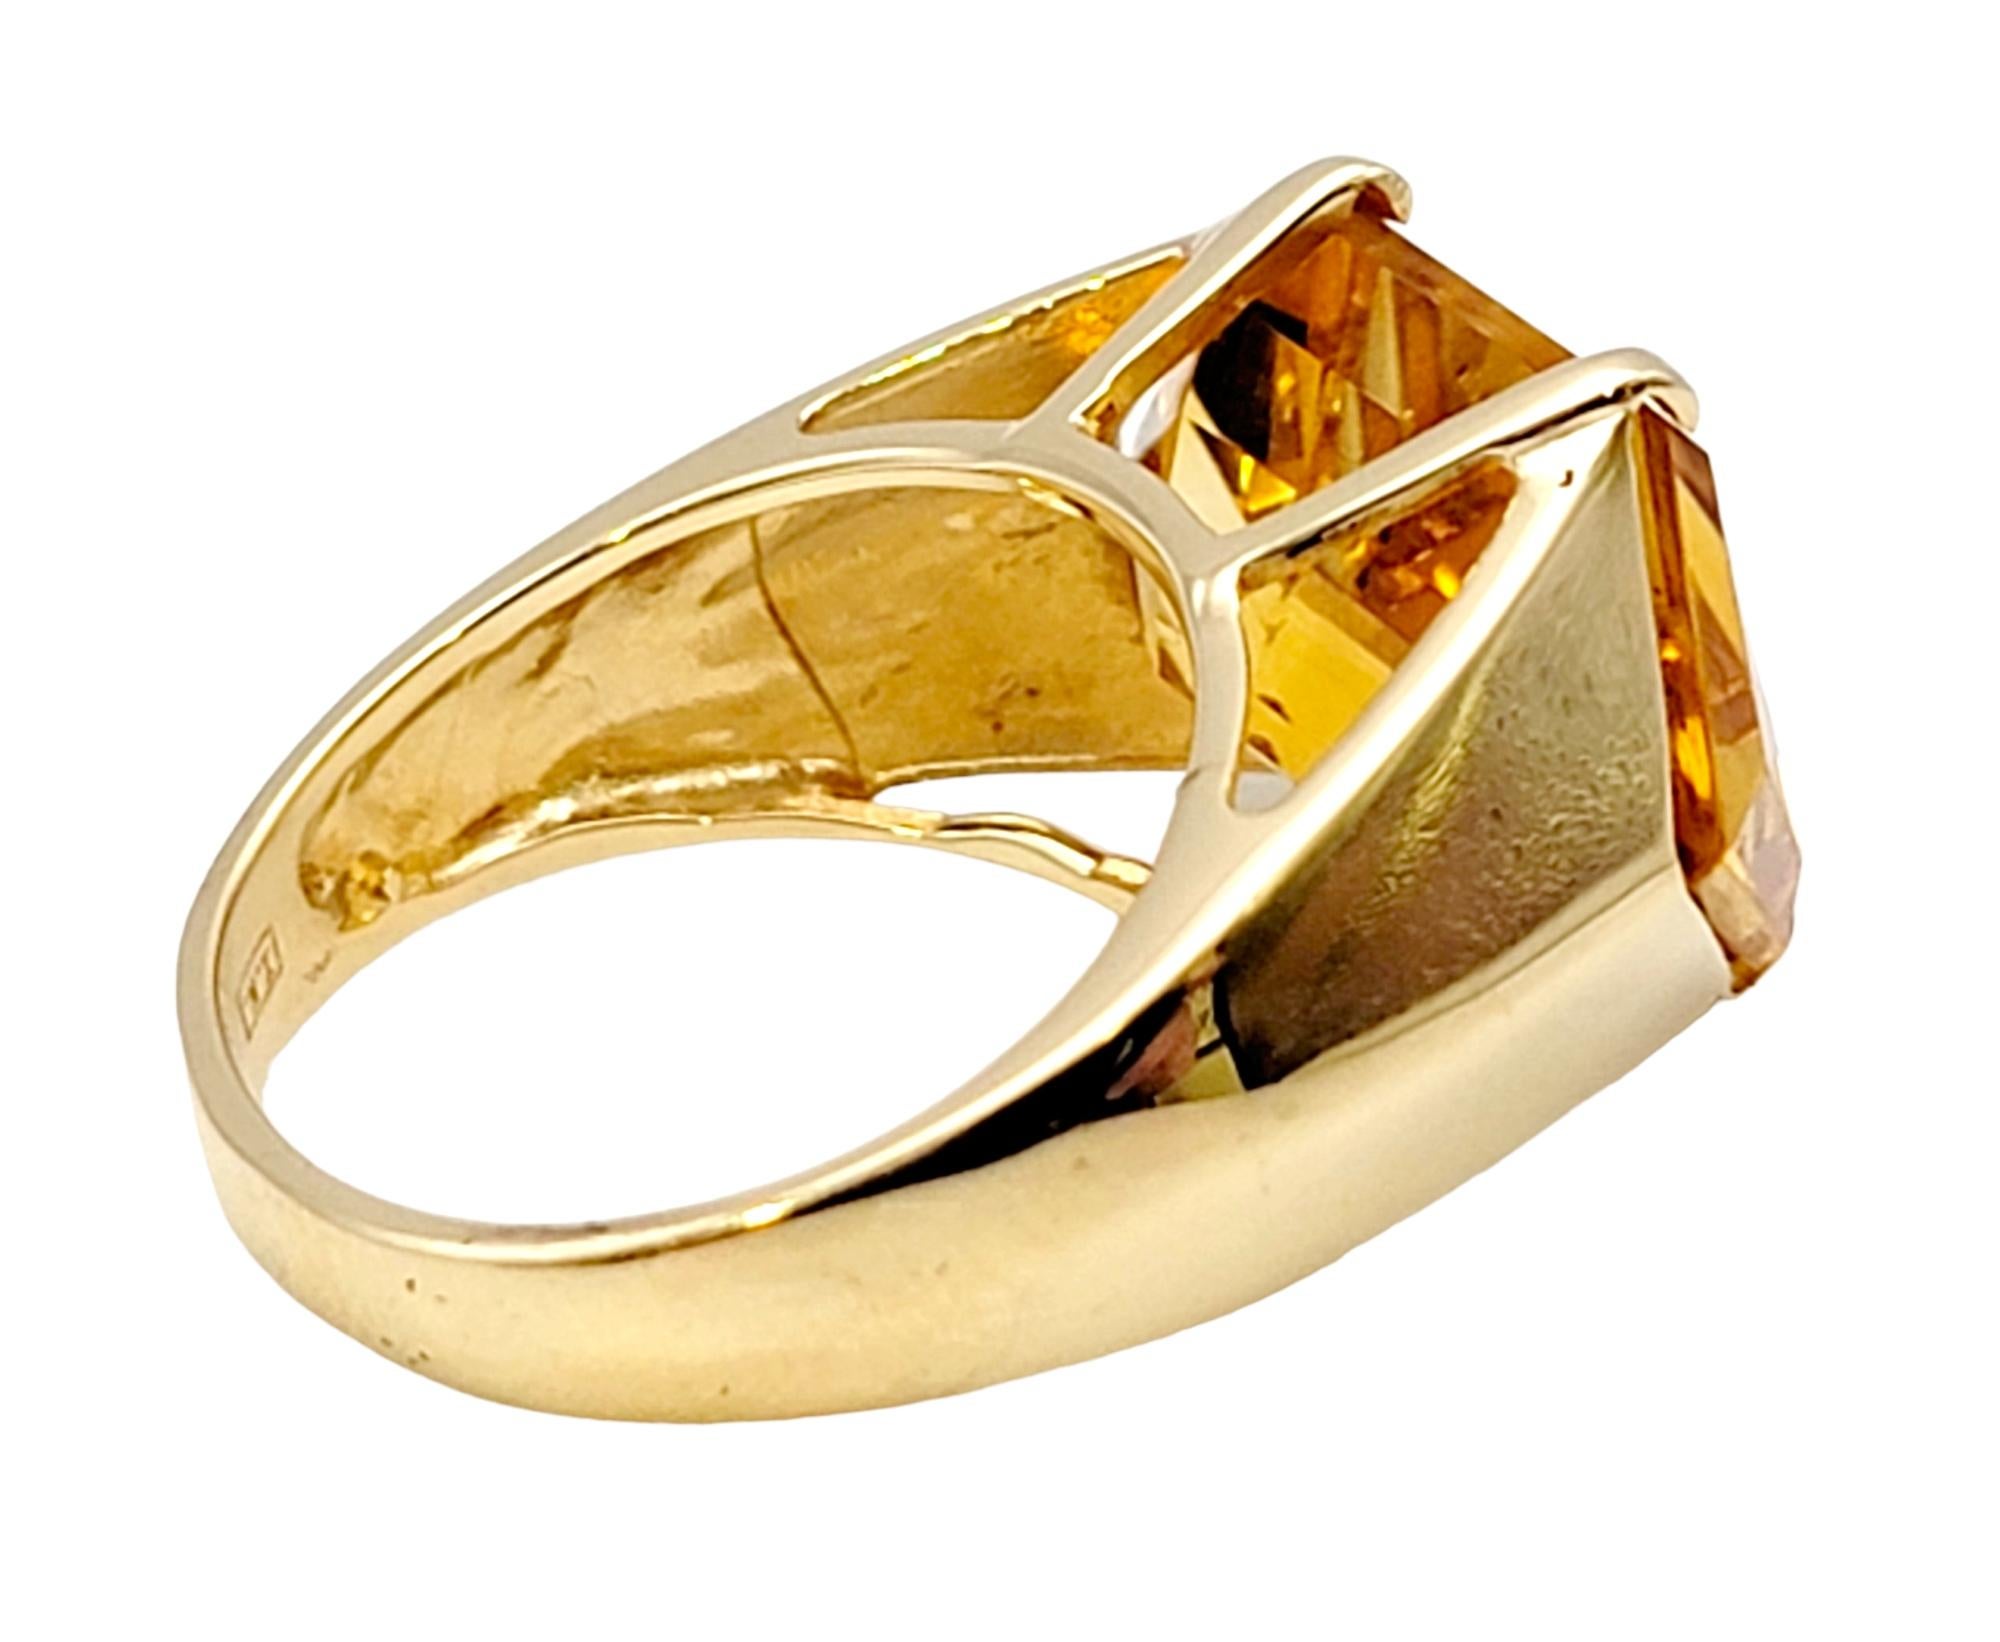 10.46 Carats Total Hexagonal Cut Citrine Cocktail Ring in 14 Karat Yellow Gold For Sale 1